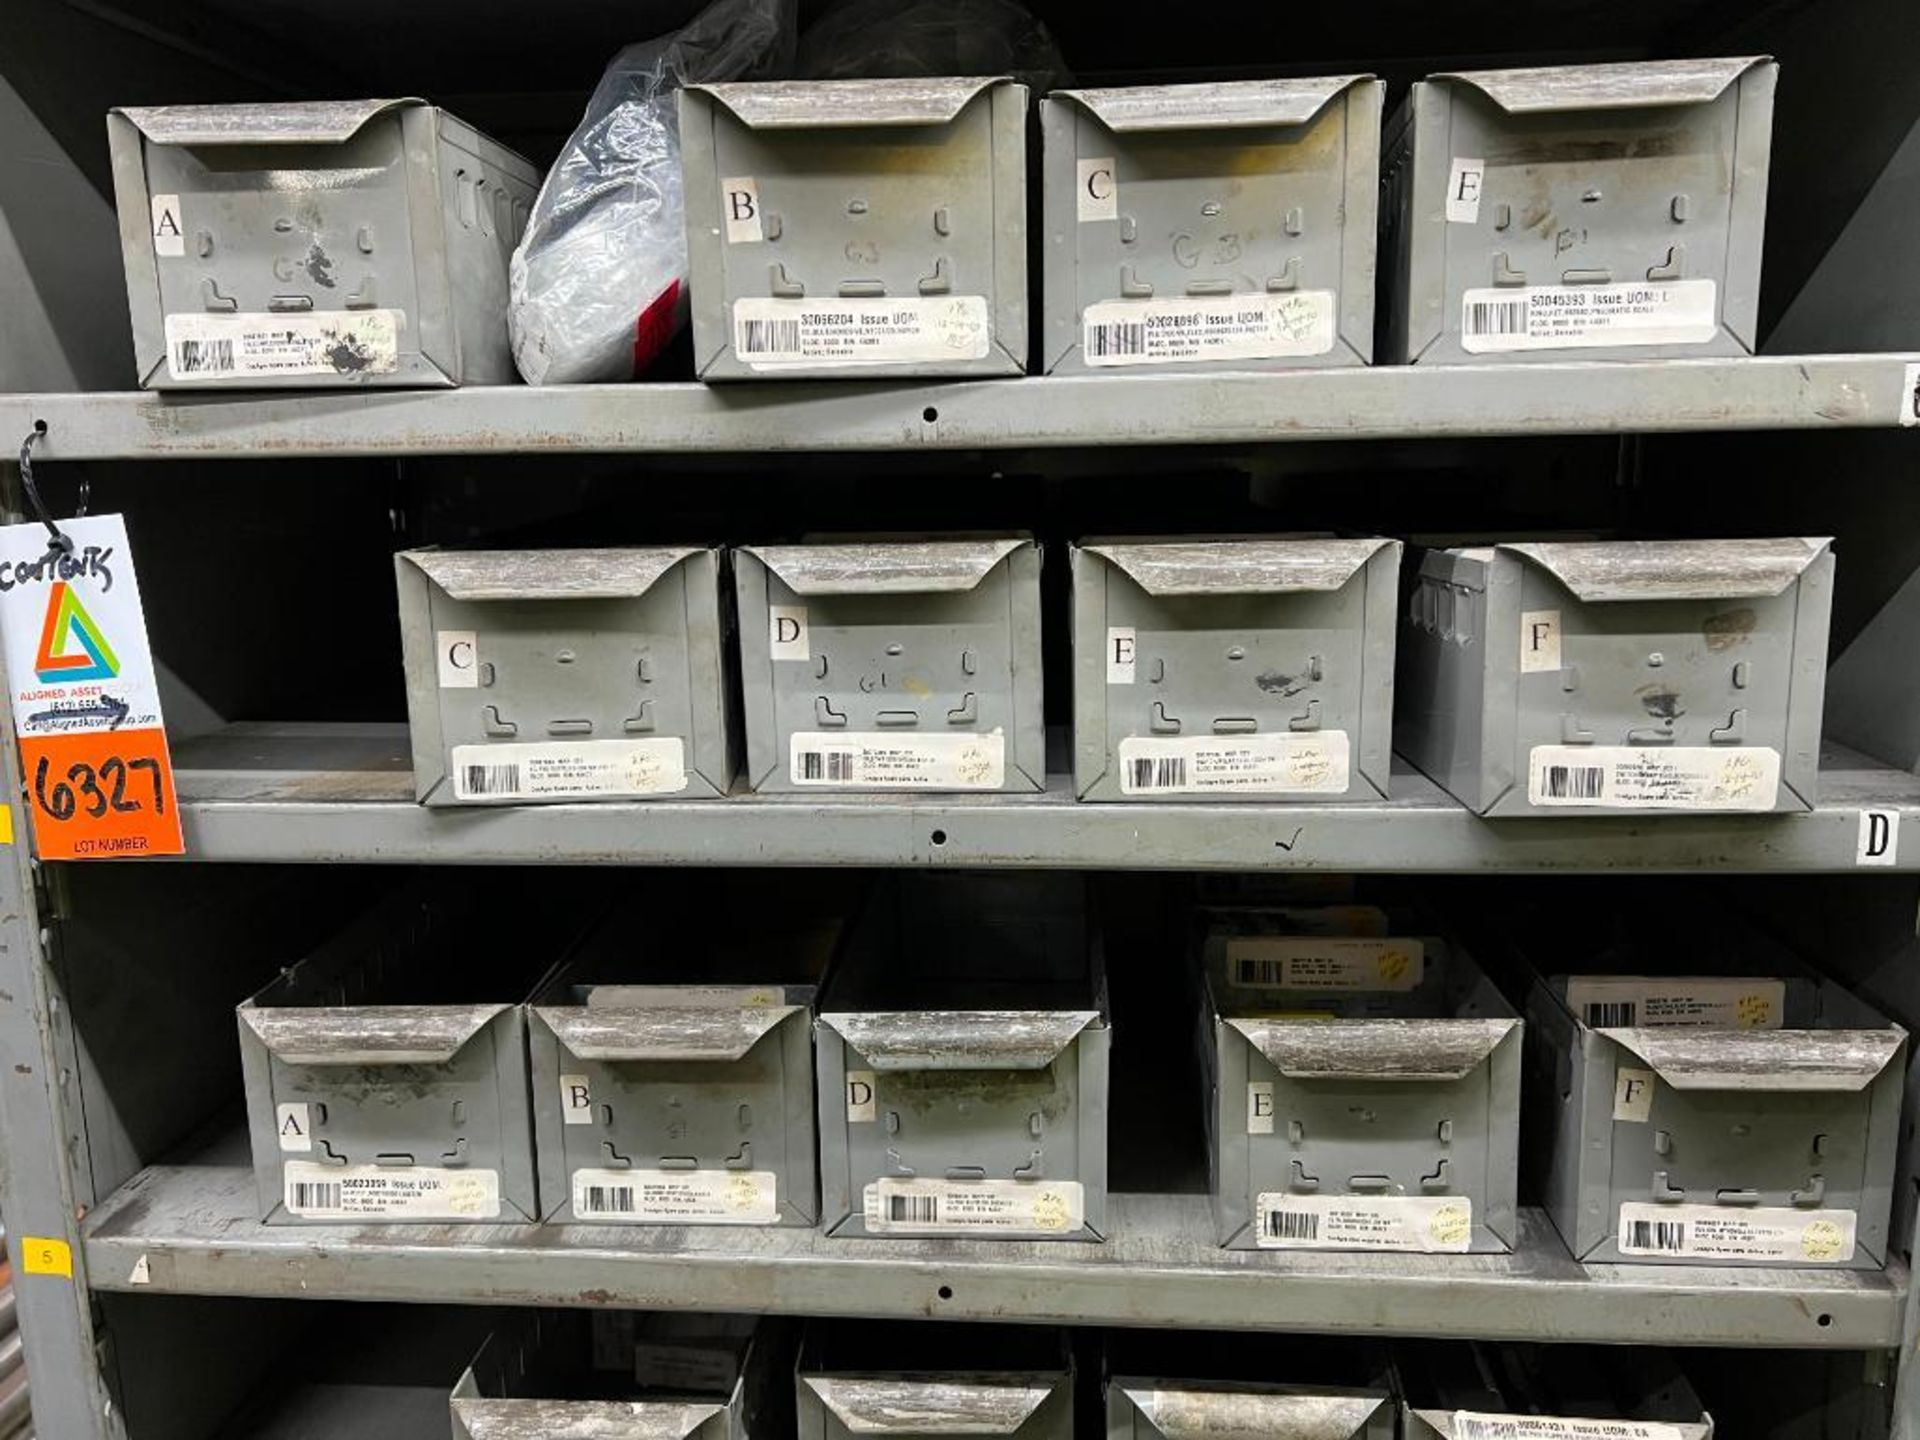 contents of gray shelving units to include, bearings, shafts, filters, fuses, pneumatic scale parts, - Image 104 of 141